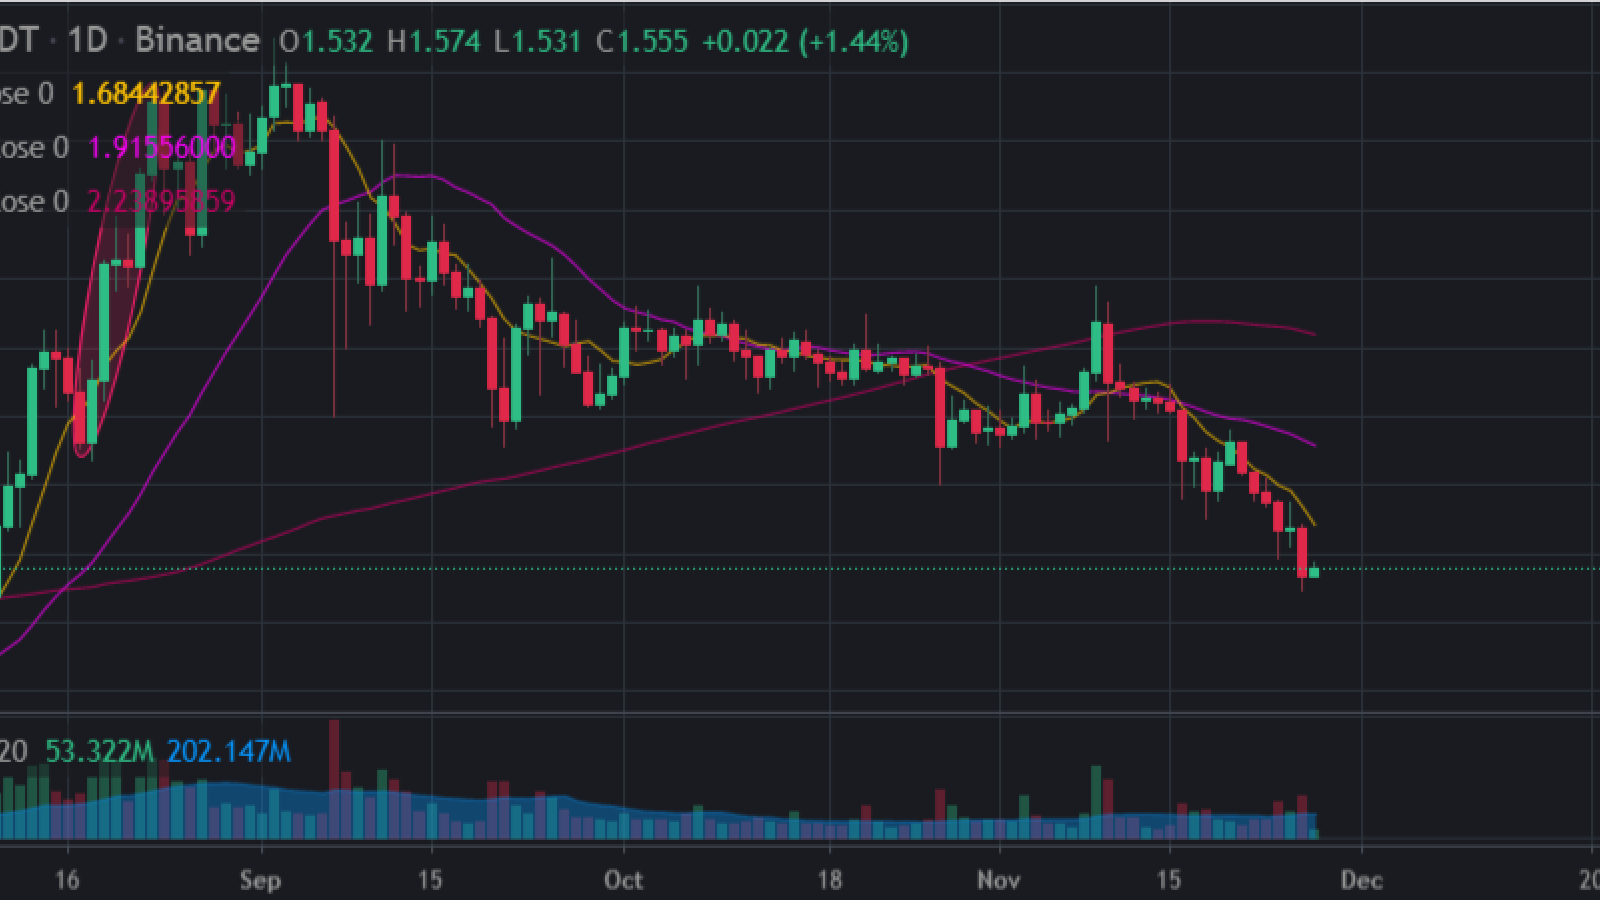 Cardano (ADA) price loses 50%, here's why